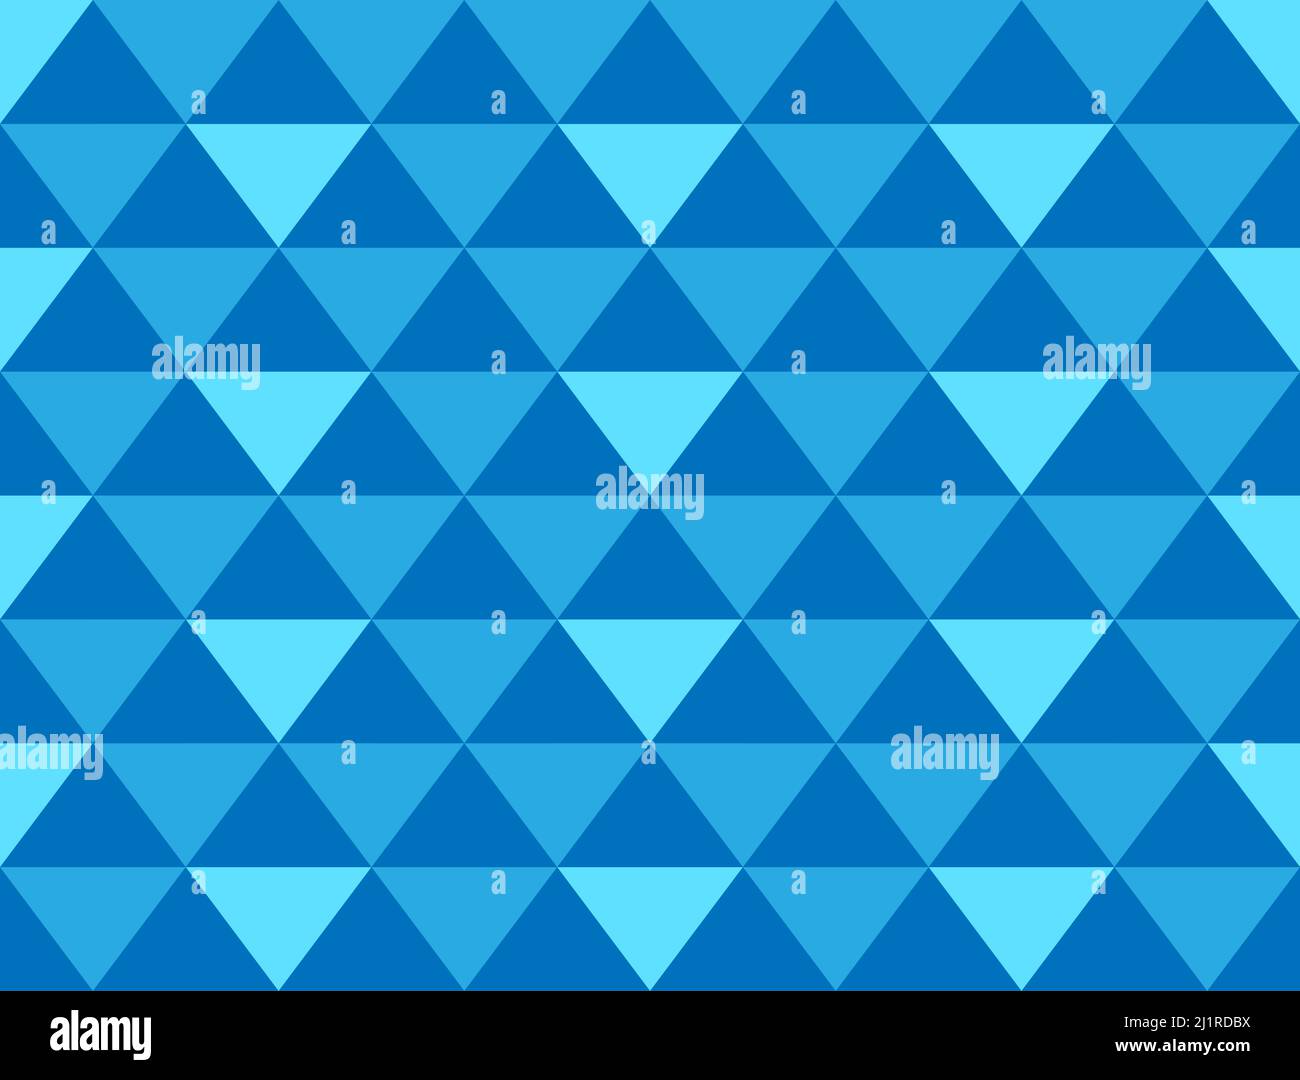 Triangle grid in a seamless repeat pattern - Vector Illustration Stock Vector